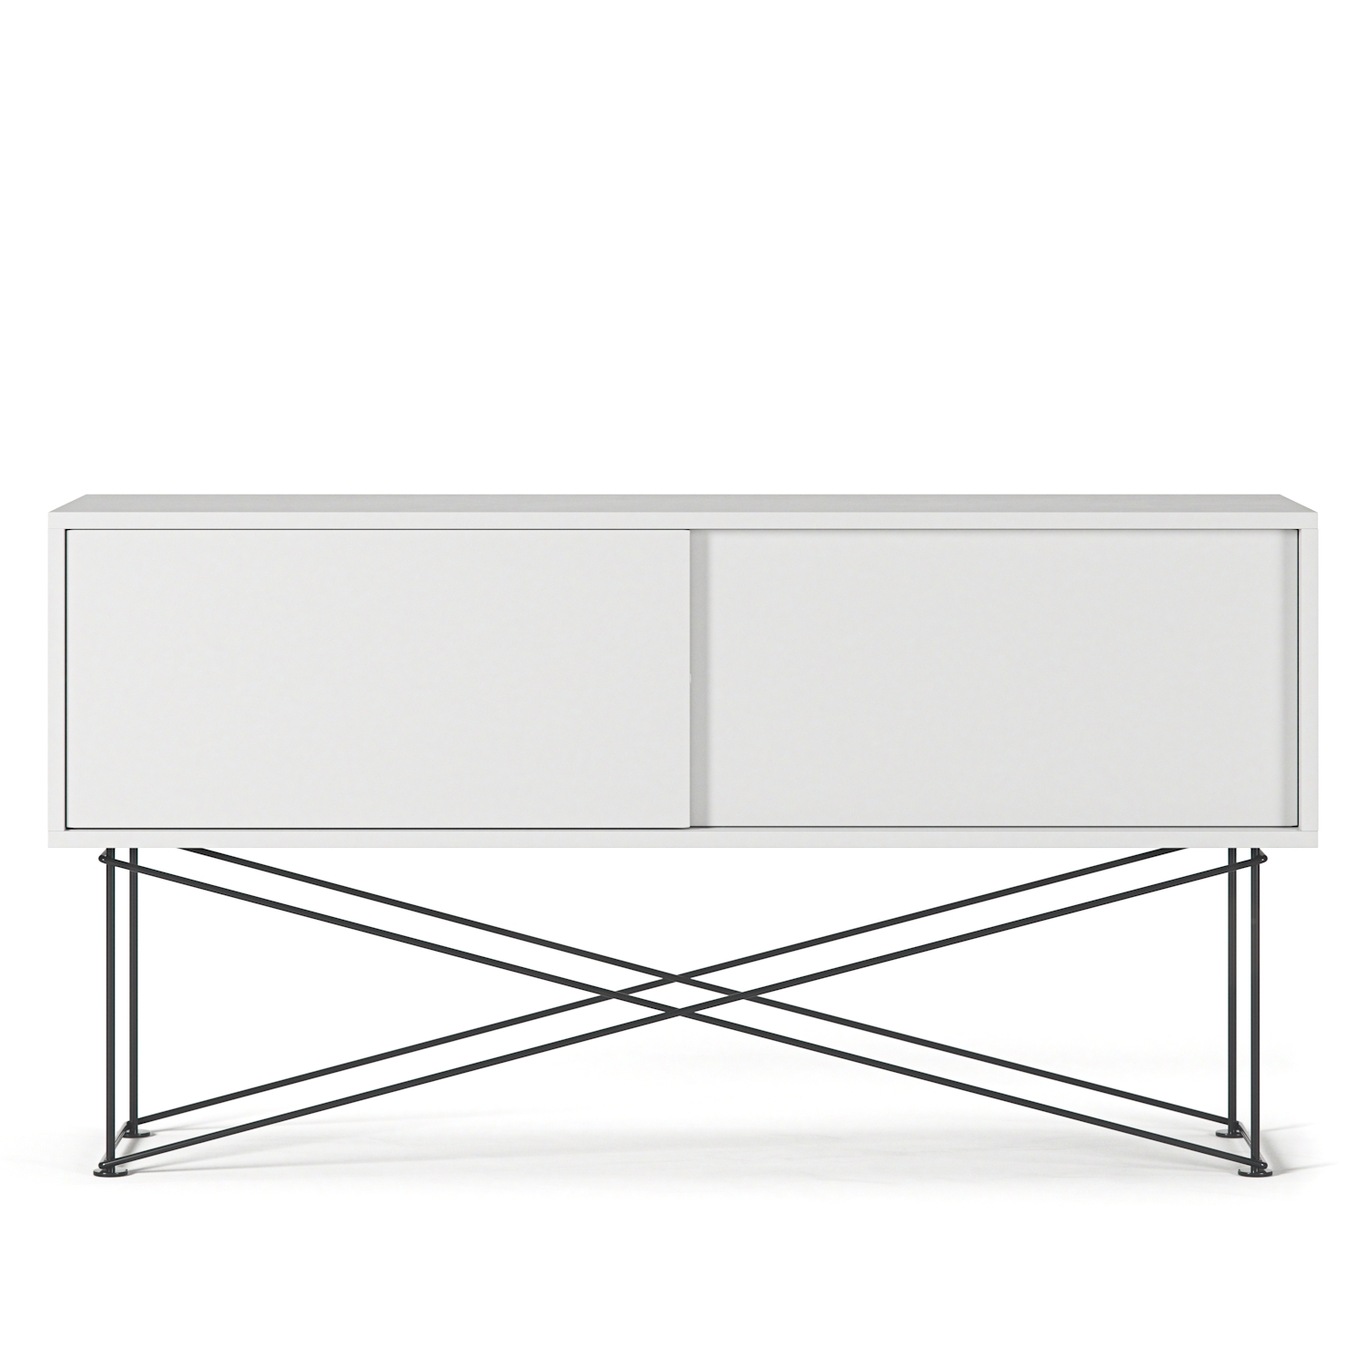 Vogue Media Bench With Stand 136 cm, White / Black